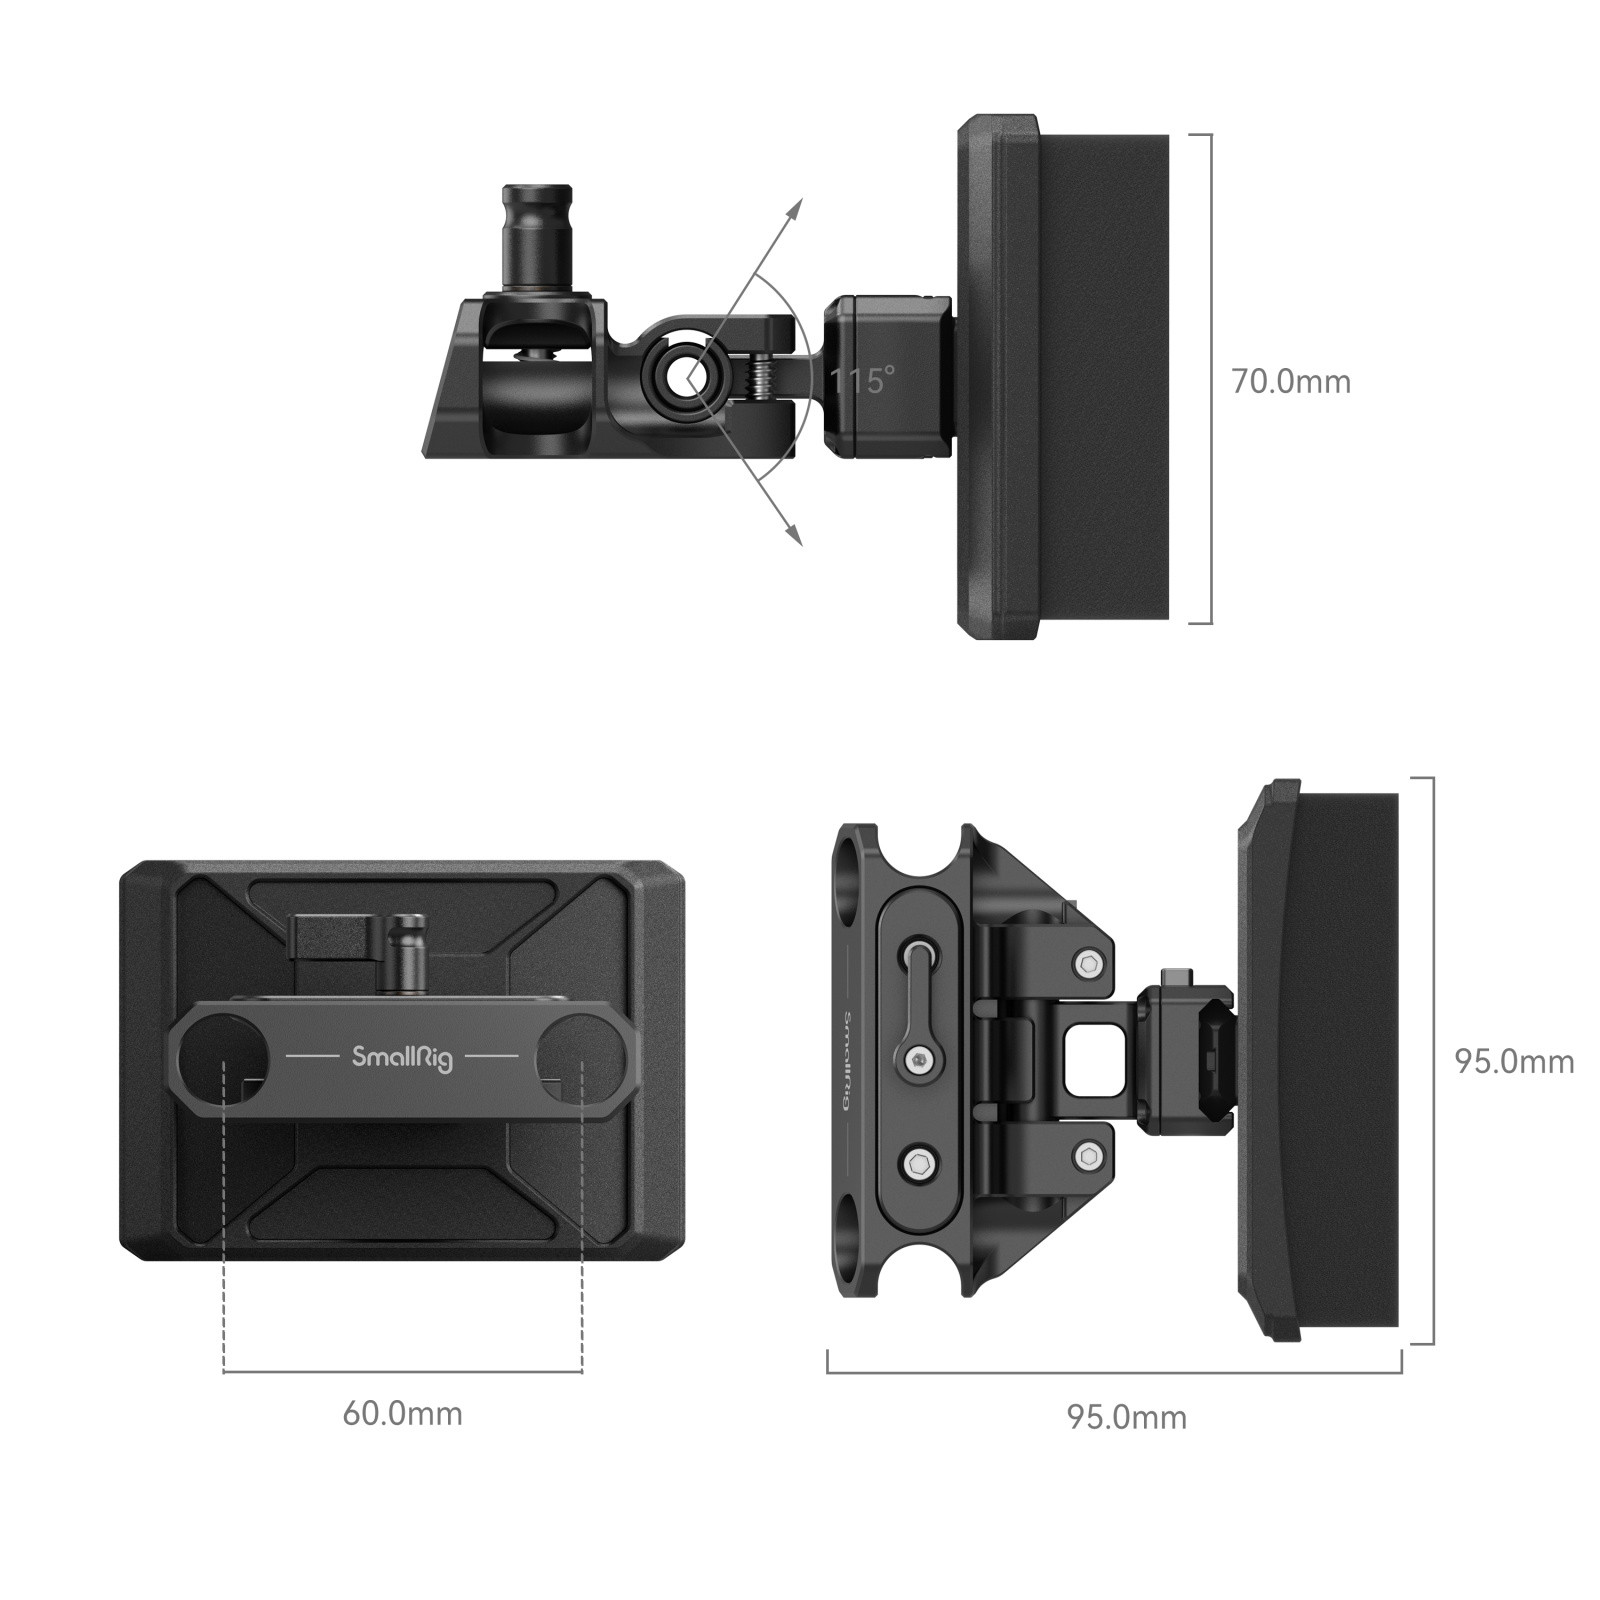 SmallRig Multi-Adjustable Chest Pad Mount Plate with Rod Clamp MD3183B